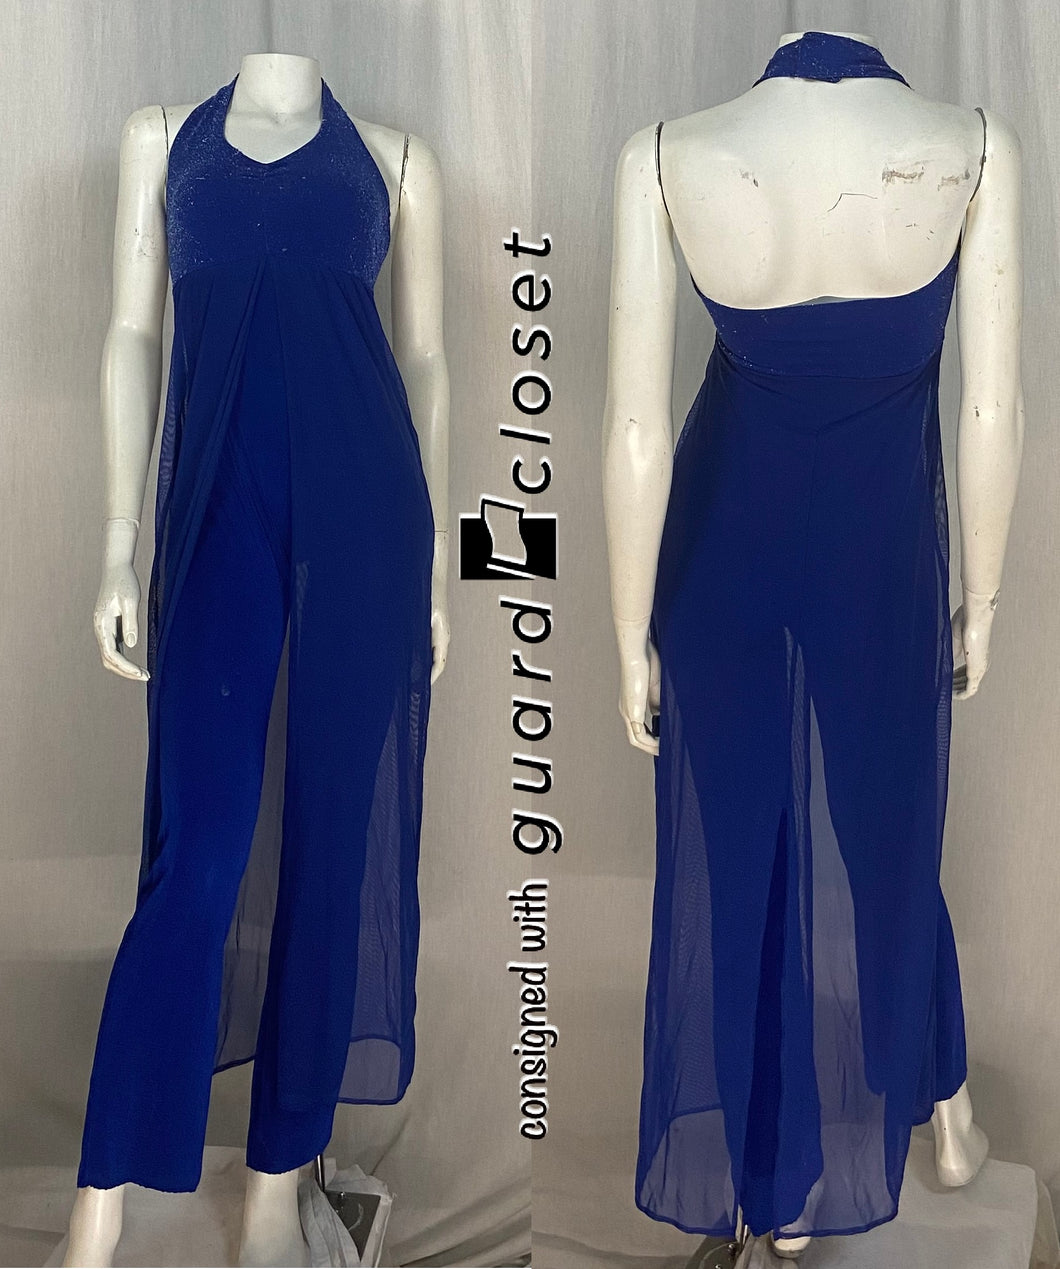 22 blue halter skirted unitards with silver mesh guardcloset